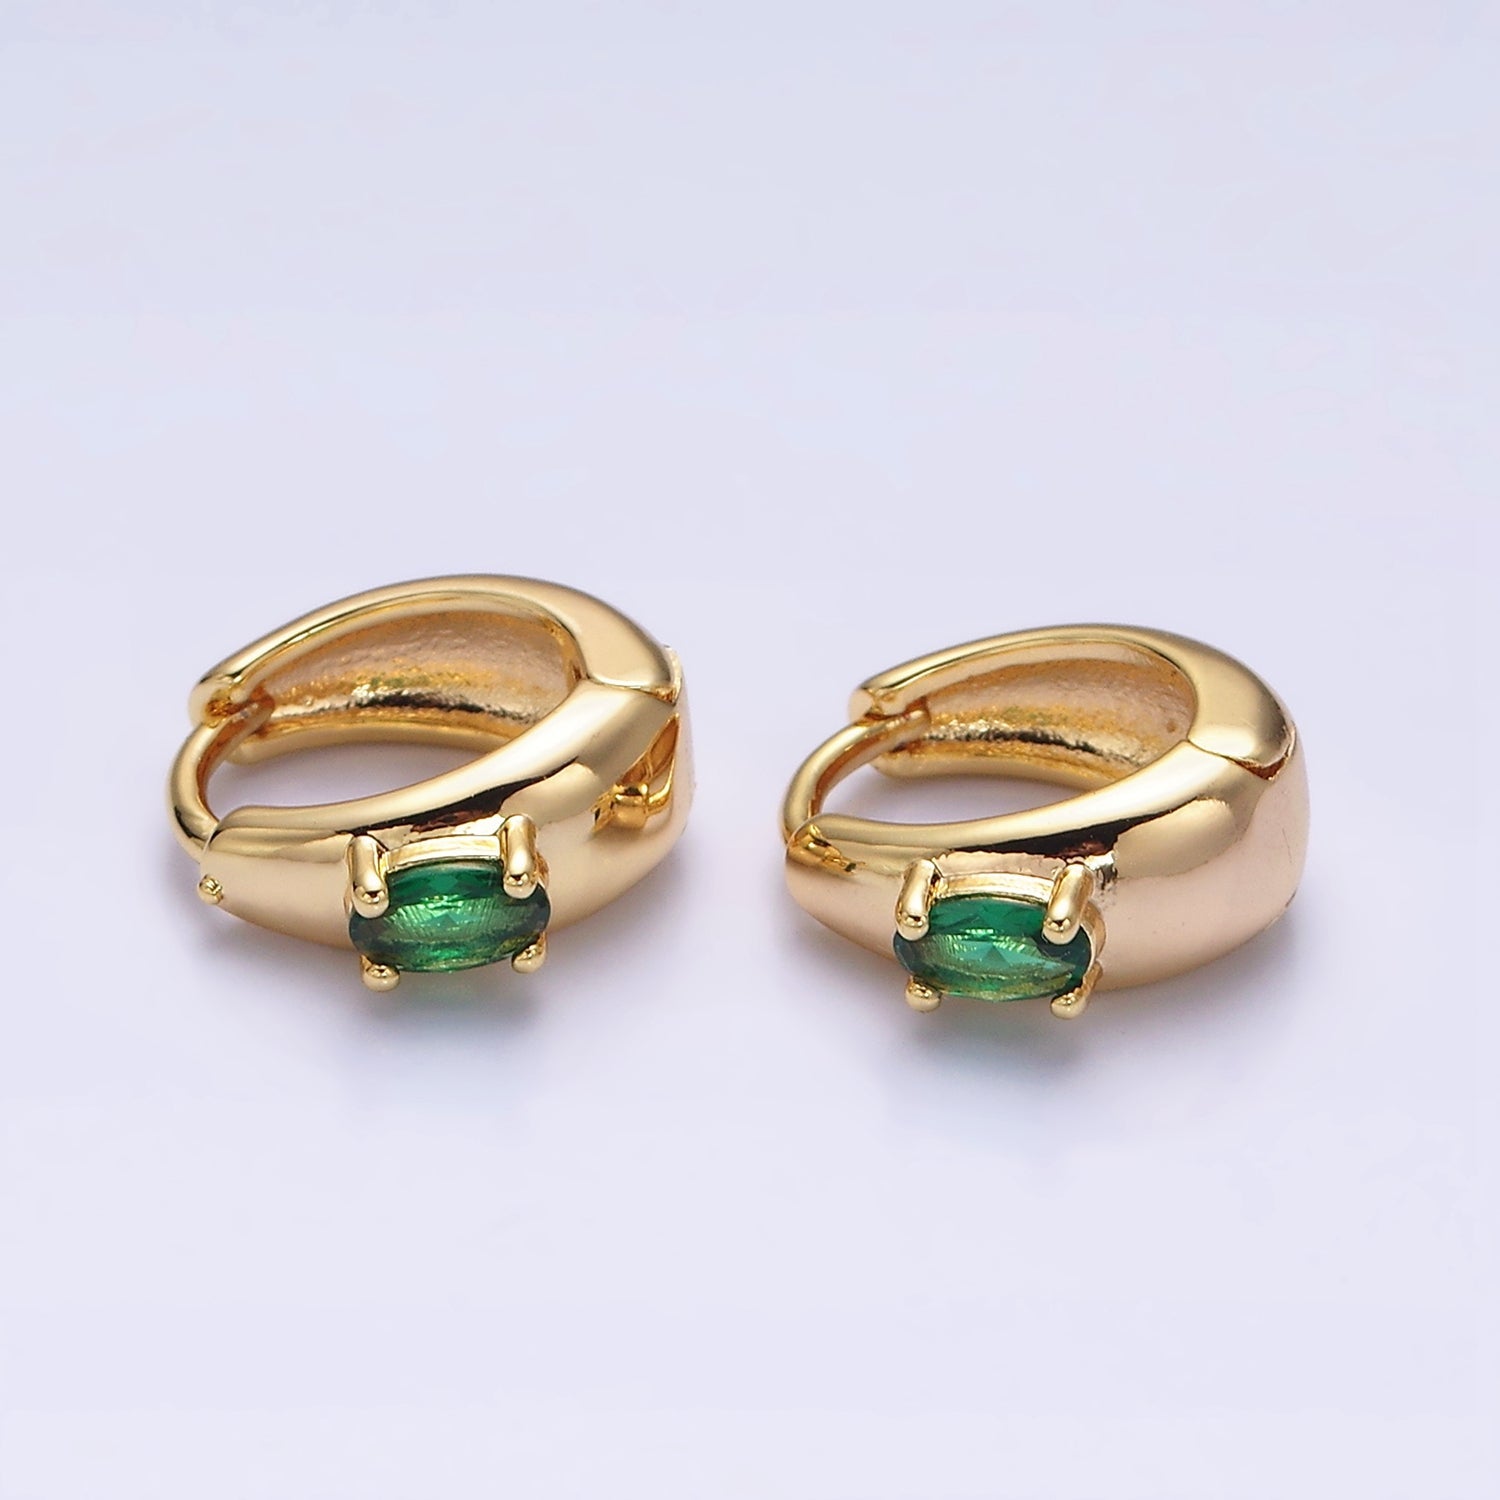 16K Gold Filled Emerald Green Oval CZ Dome 13mm Huggie Earrings in Silver & Gold | AB1501 AD1016